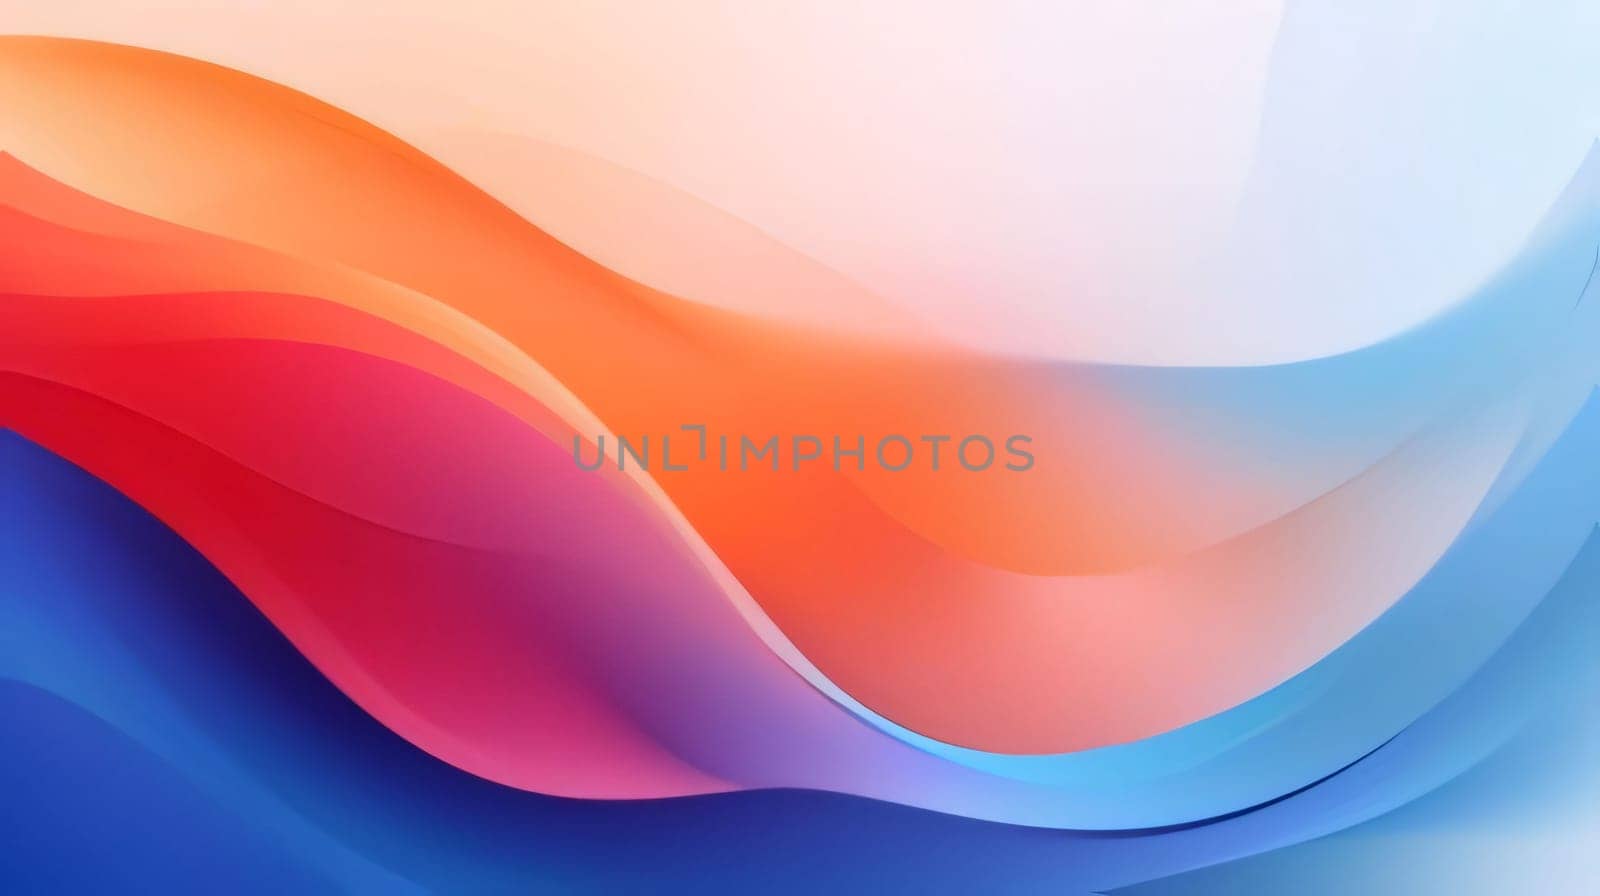 Abstract background design: abstract colorful background with smooth lines in blue, orange and pink